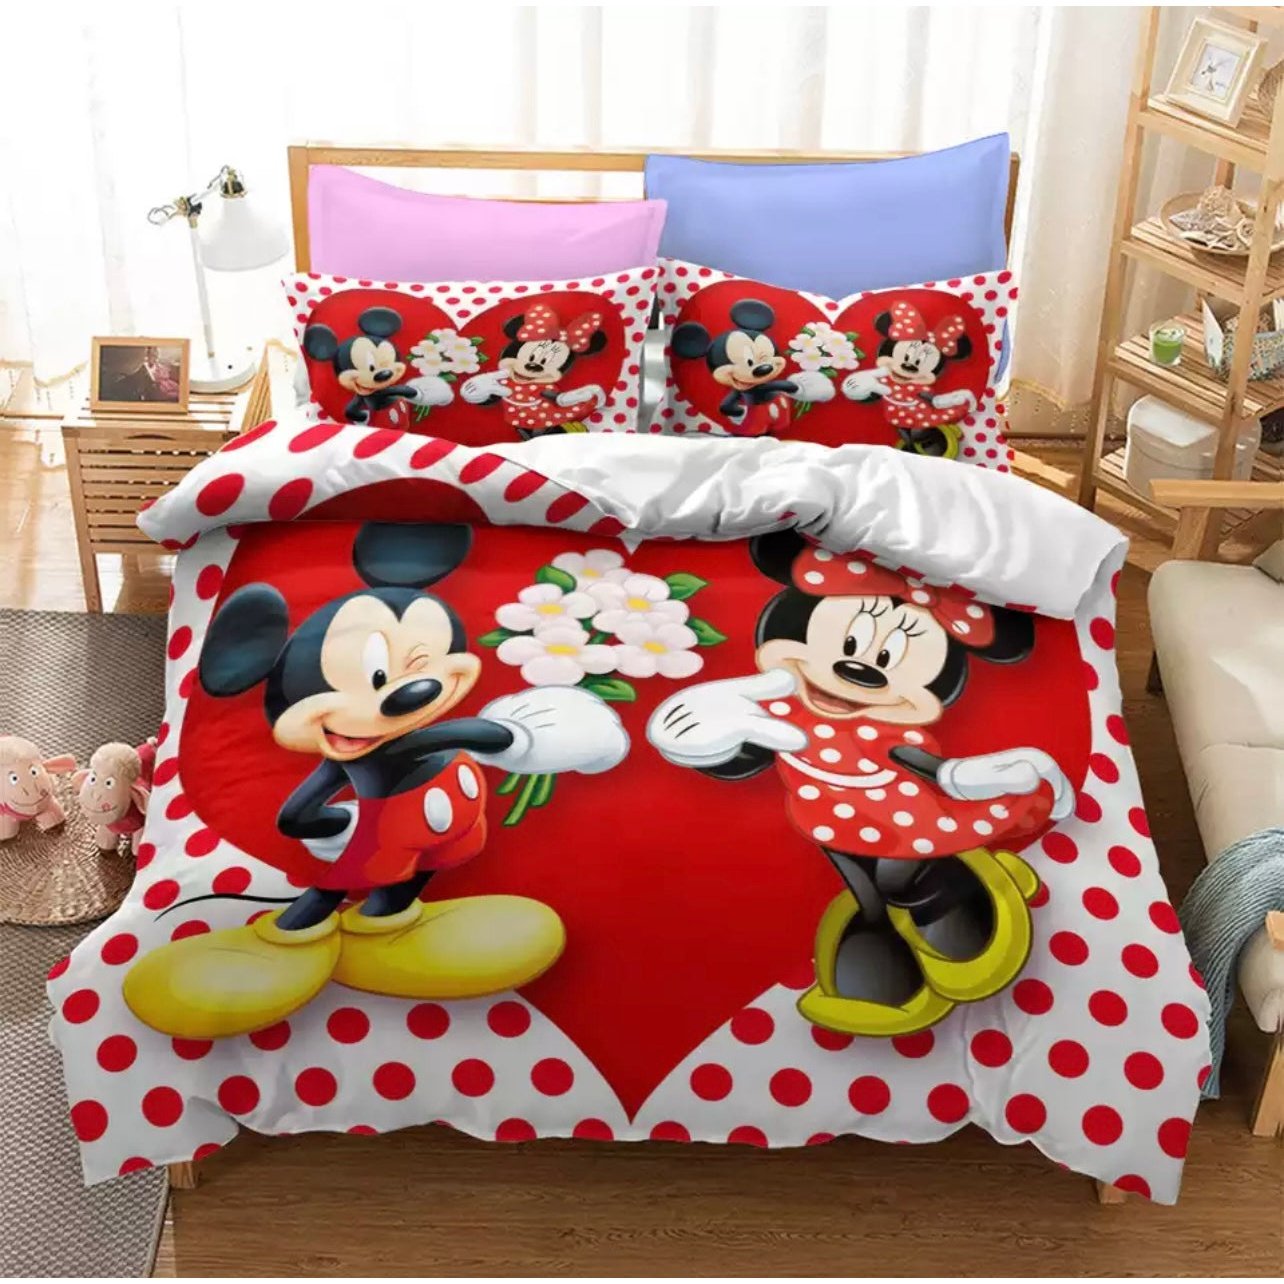 Lenjerie Disney din Bumbac Superior 6 Piese Cod-FPT11